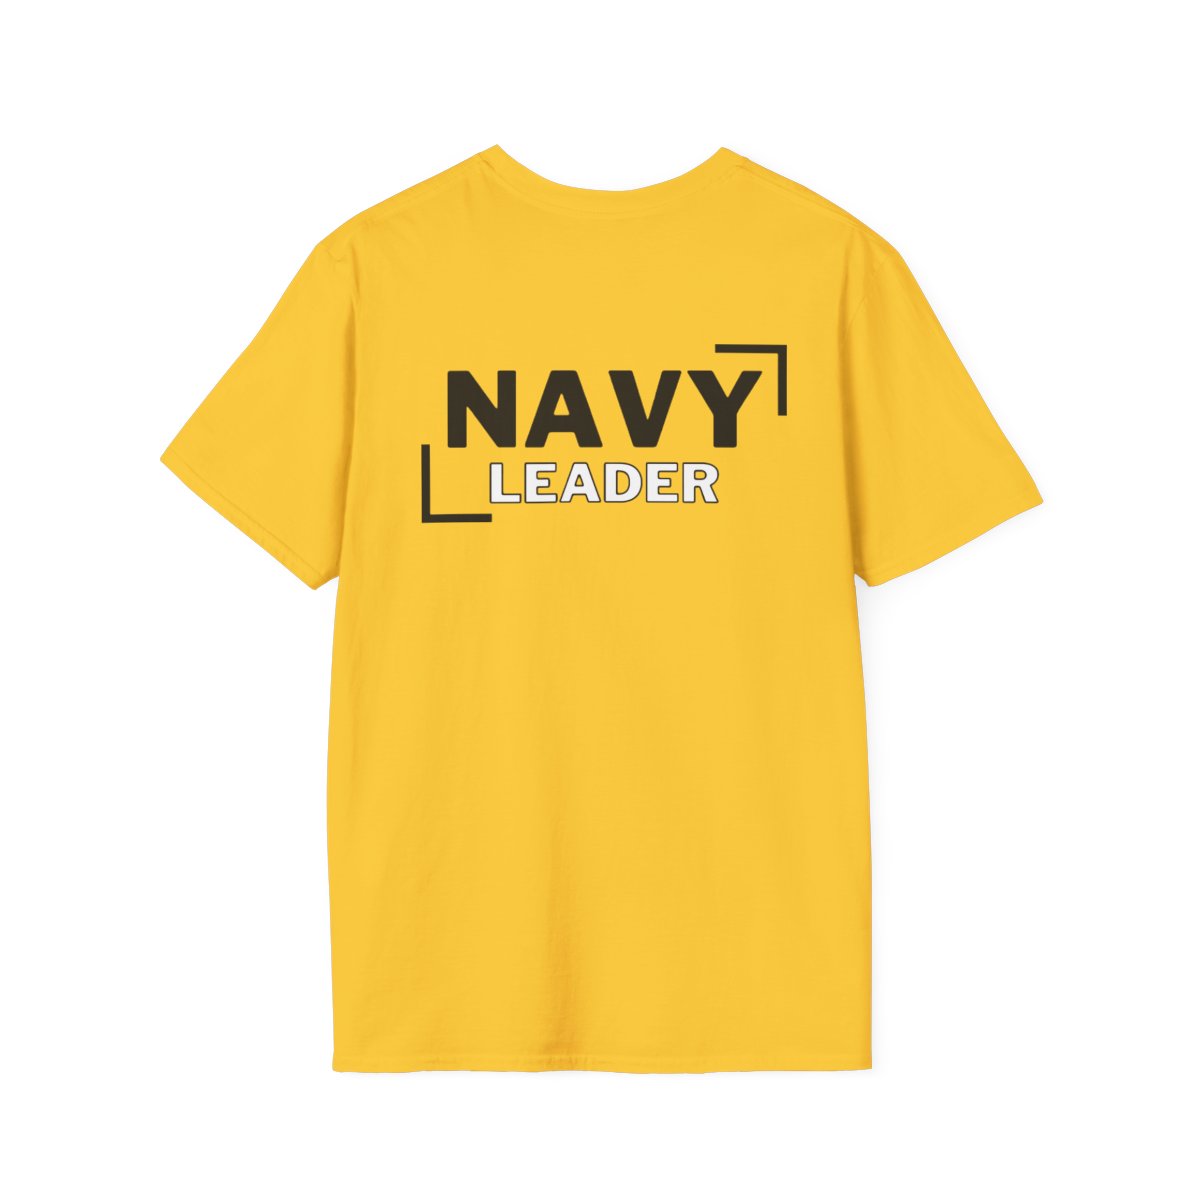 Navy Chief Selectee Unisex Softstyle T-Shirt   product thumbnail image